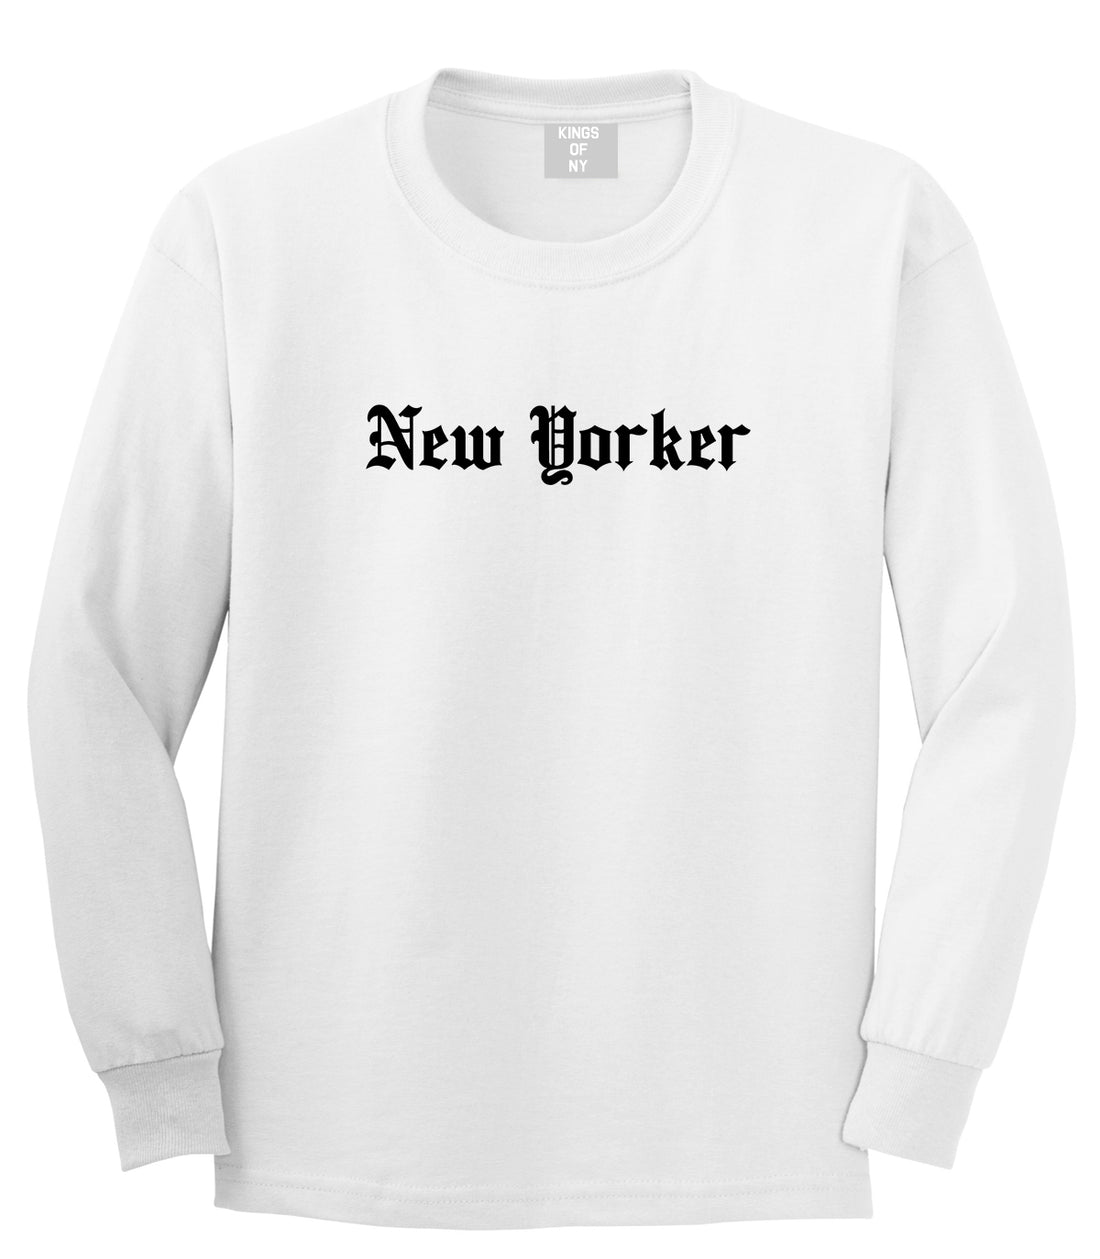 New Yorker Old English Mens Long Sleeve T-Shirt White by Kings Of NY